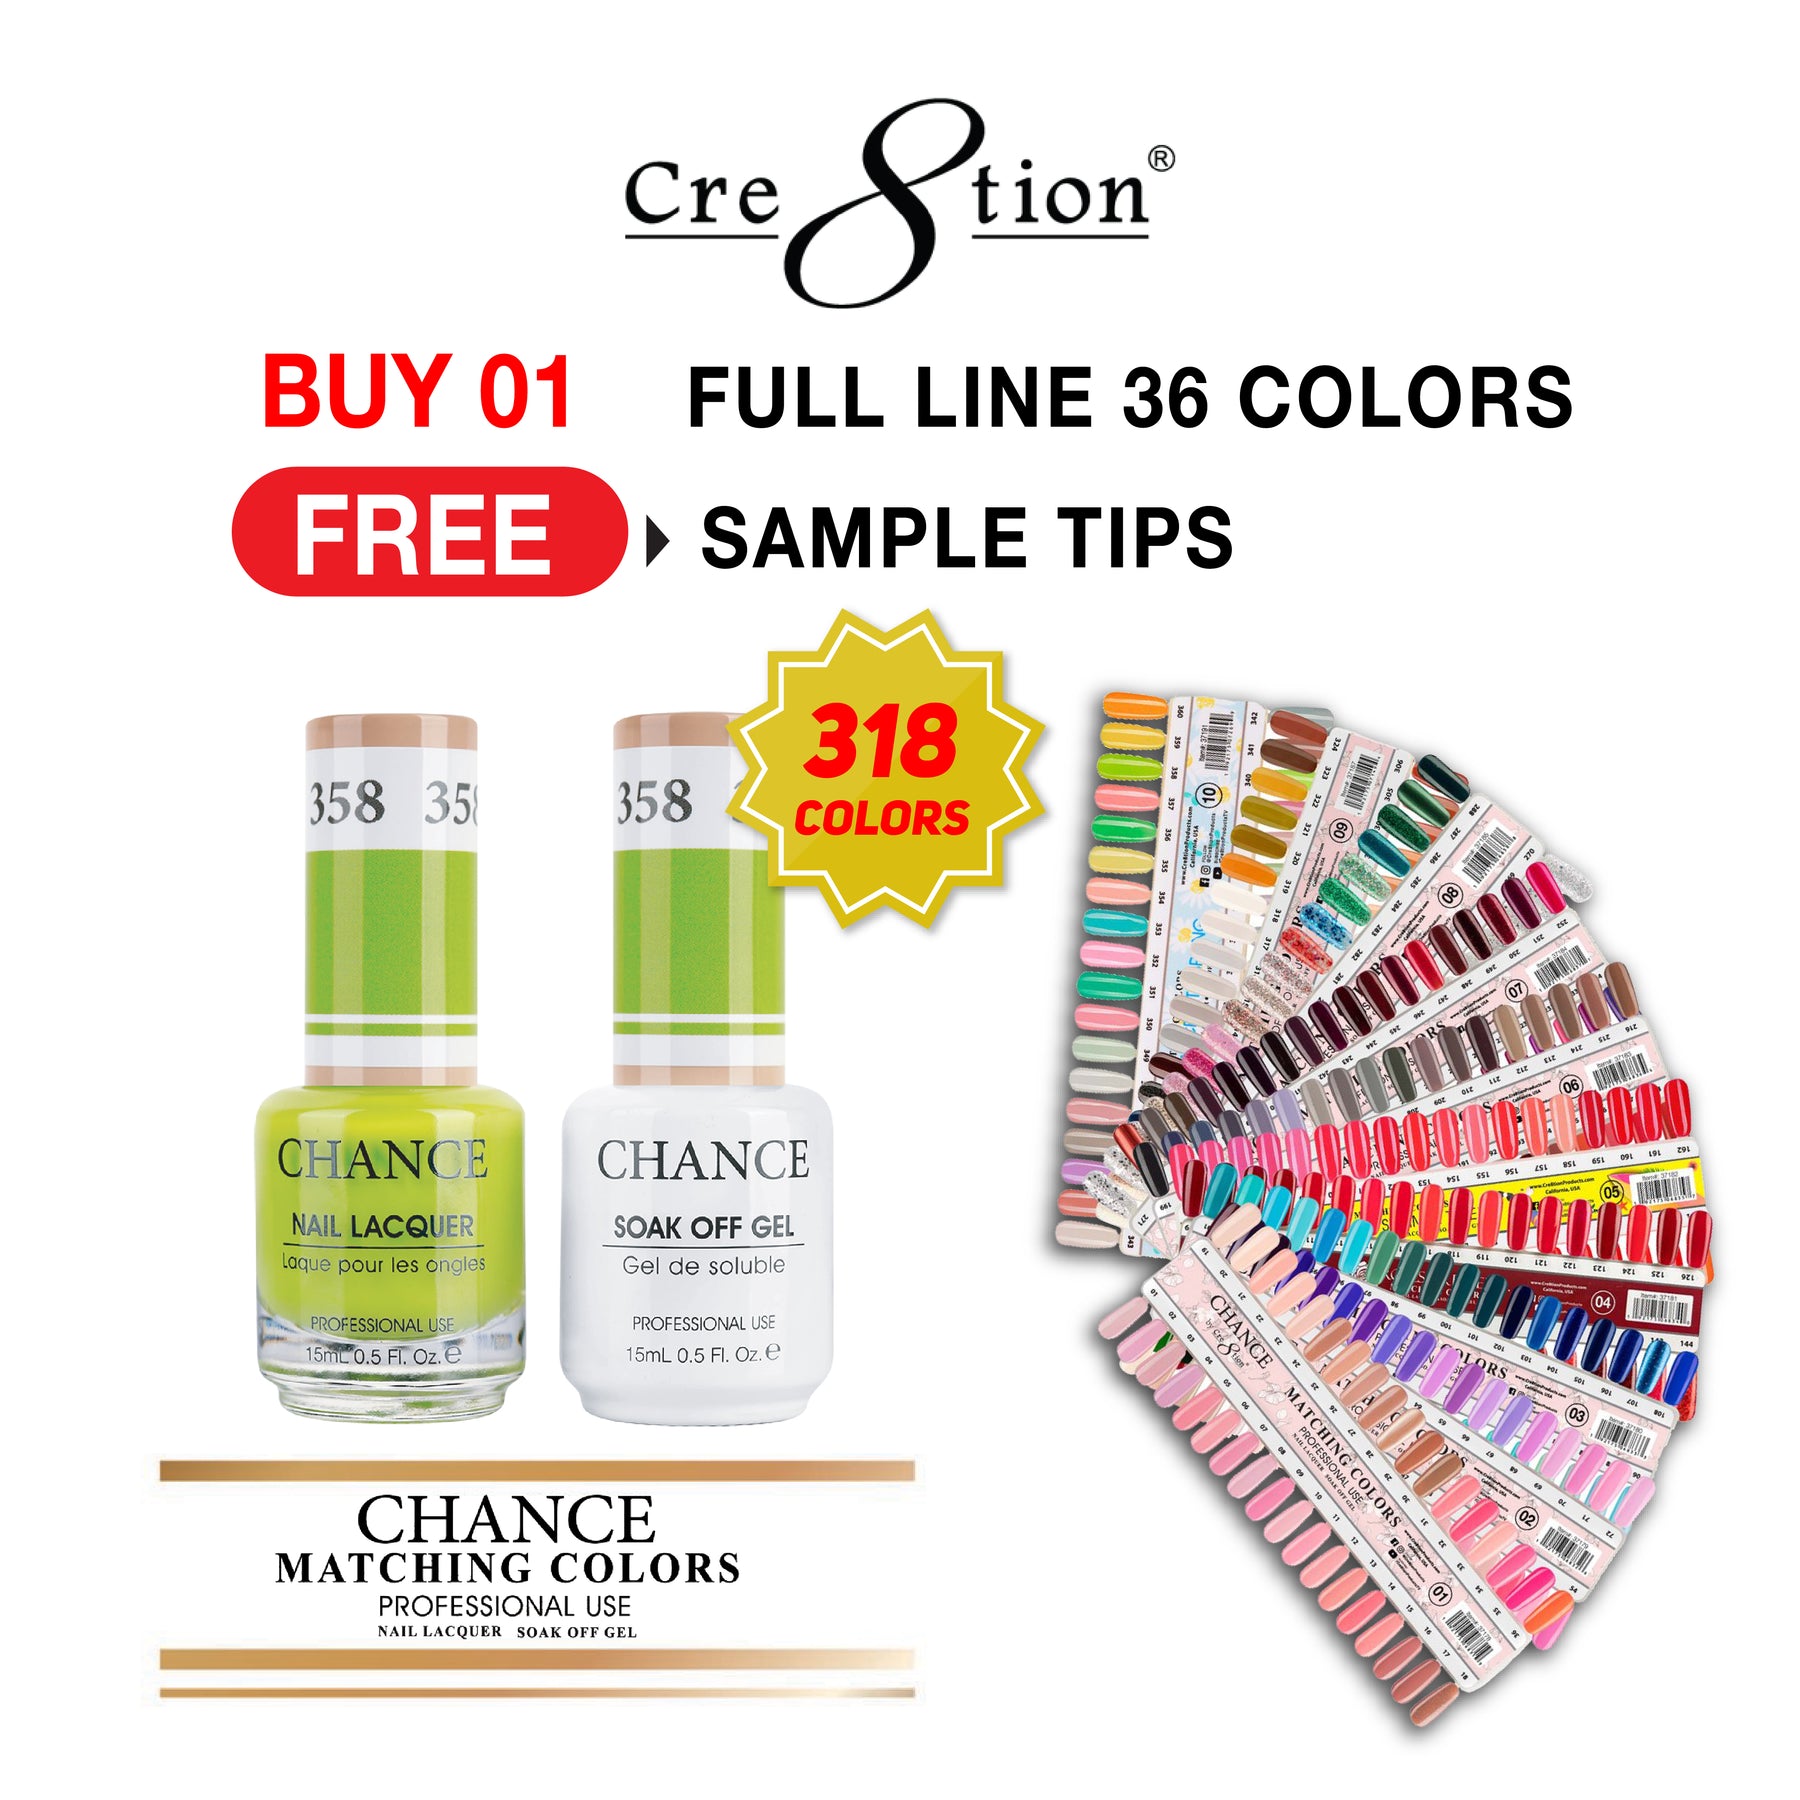 Chance Gel Polish & Nail Lacquer (by Cre8tion), Buy 1 Bare colection Free 1